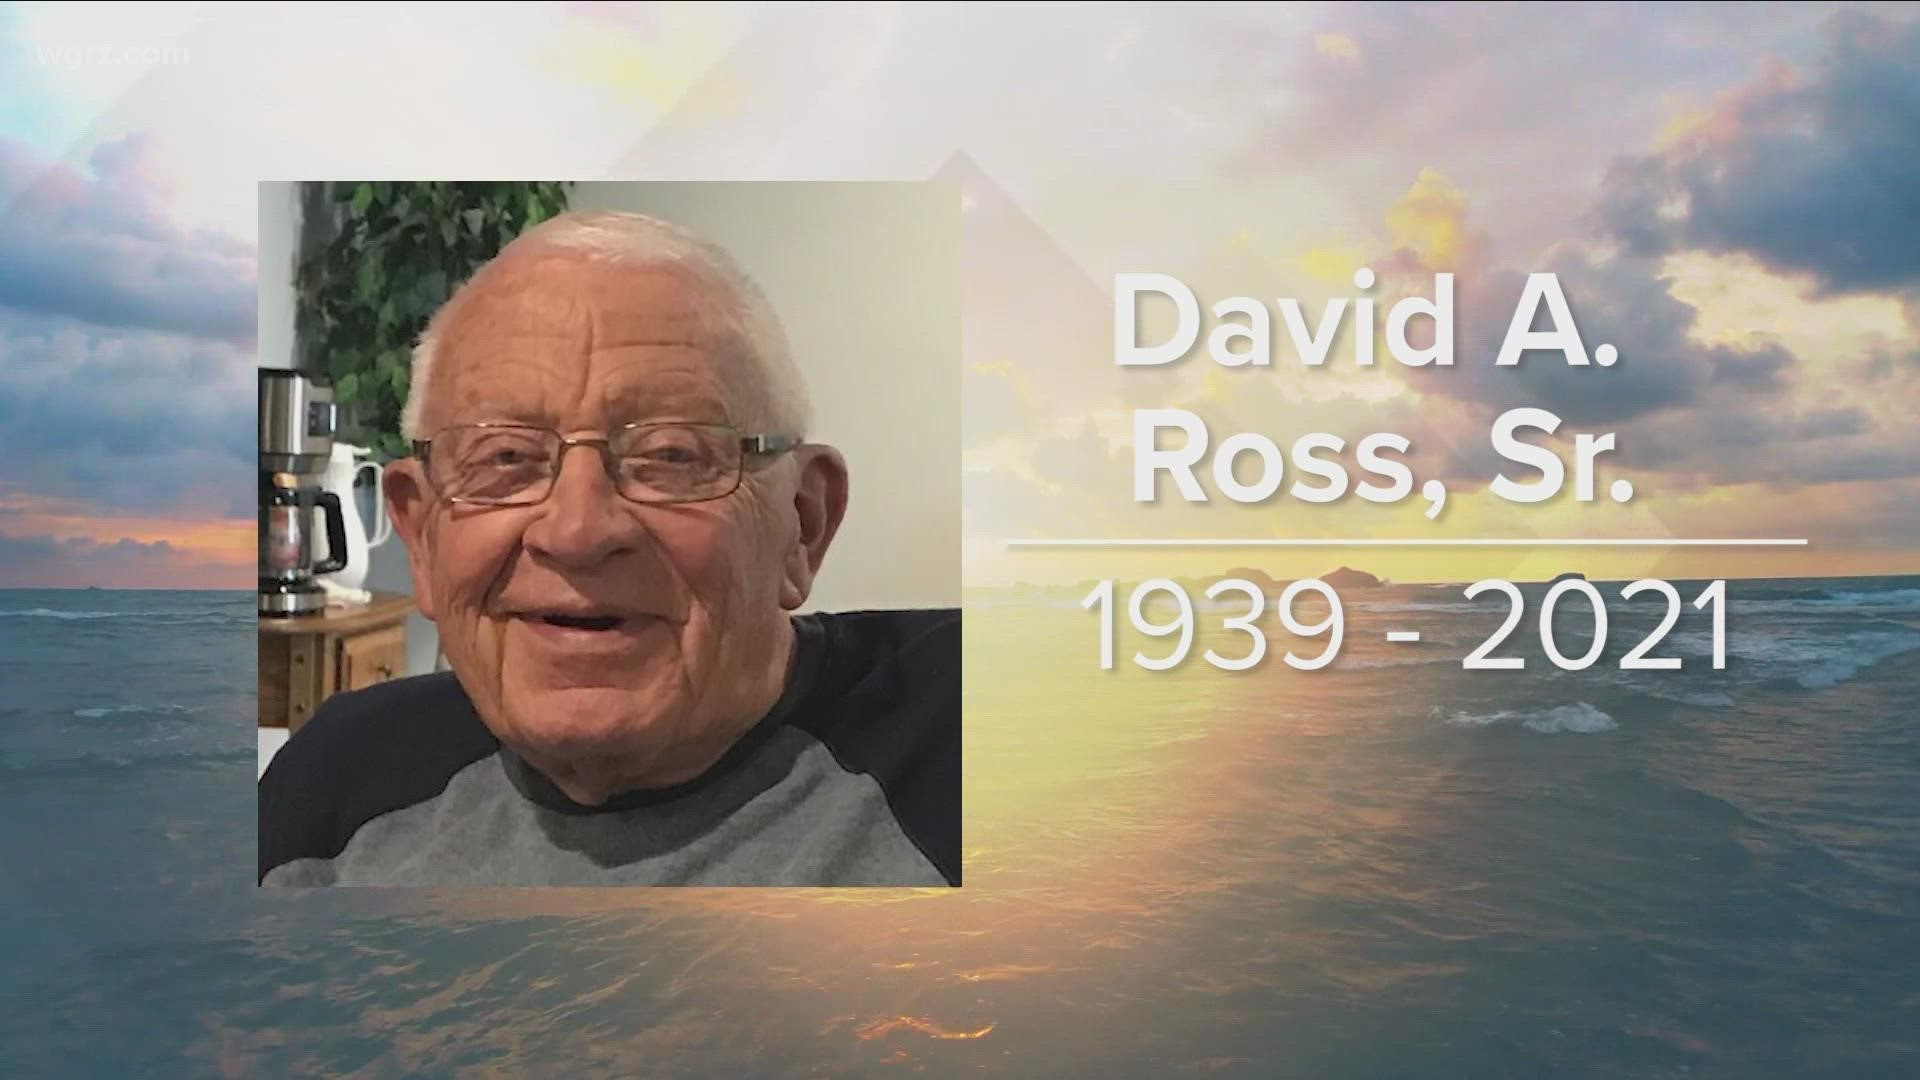 David Ross spent more than five decades helping people through that time as a funeral director. A legacy he passed down through the generations.